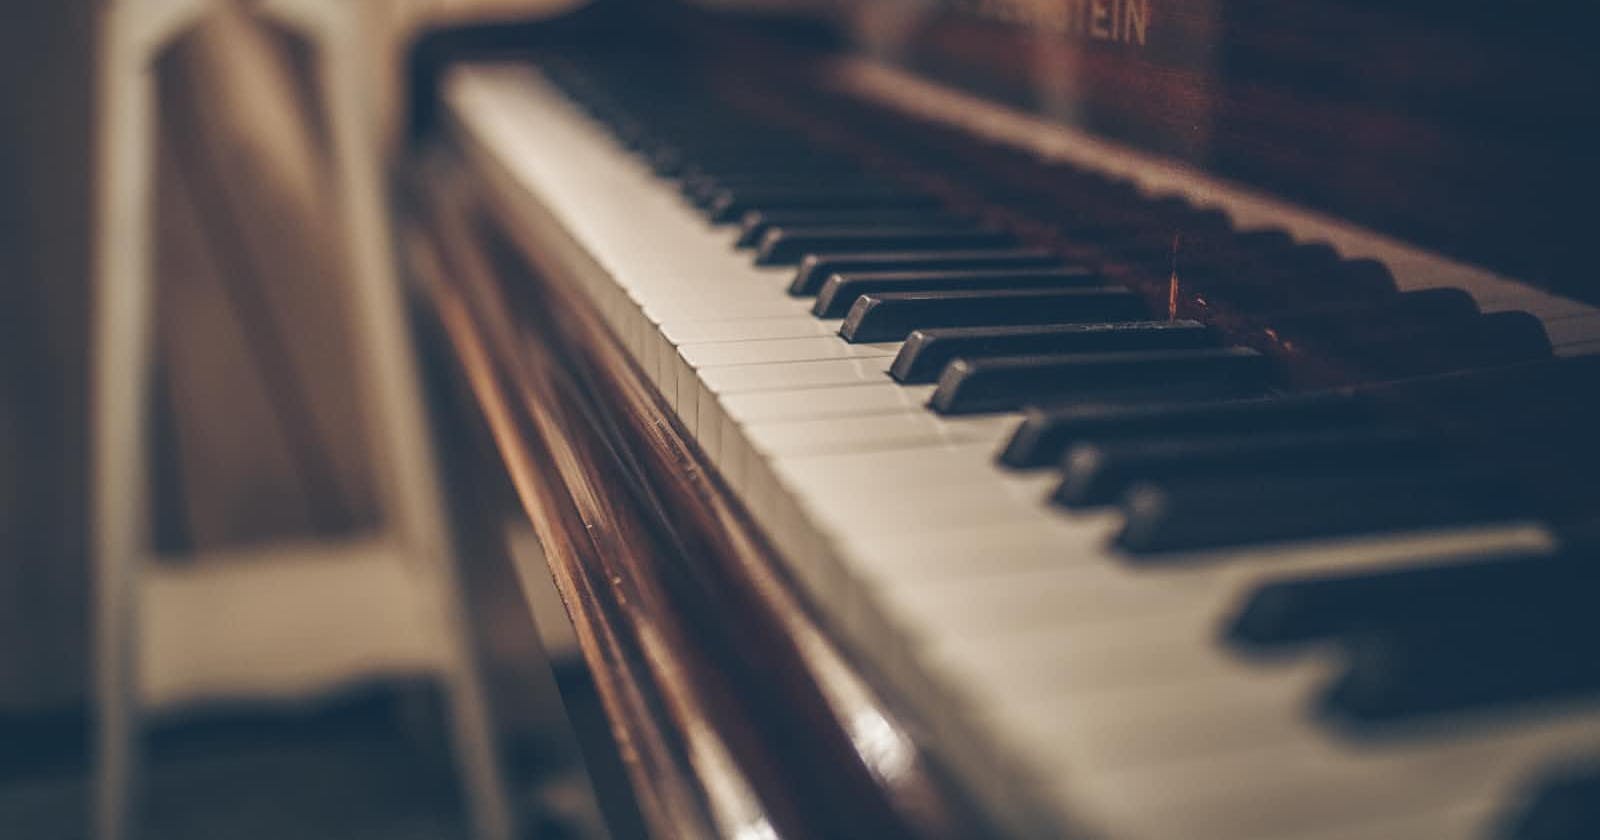 Day 32: Learning Responsive Web Design by Building a Piano